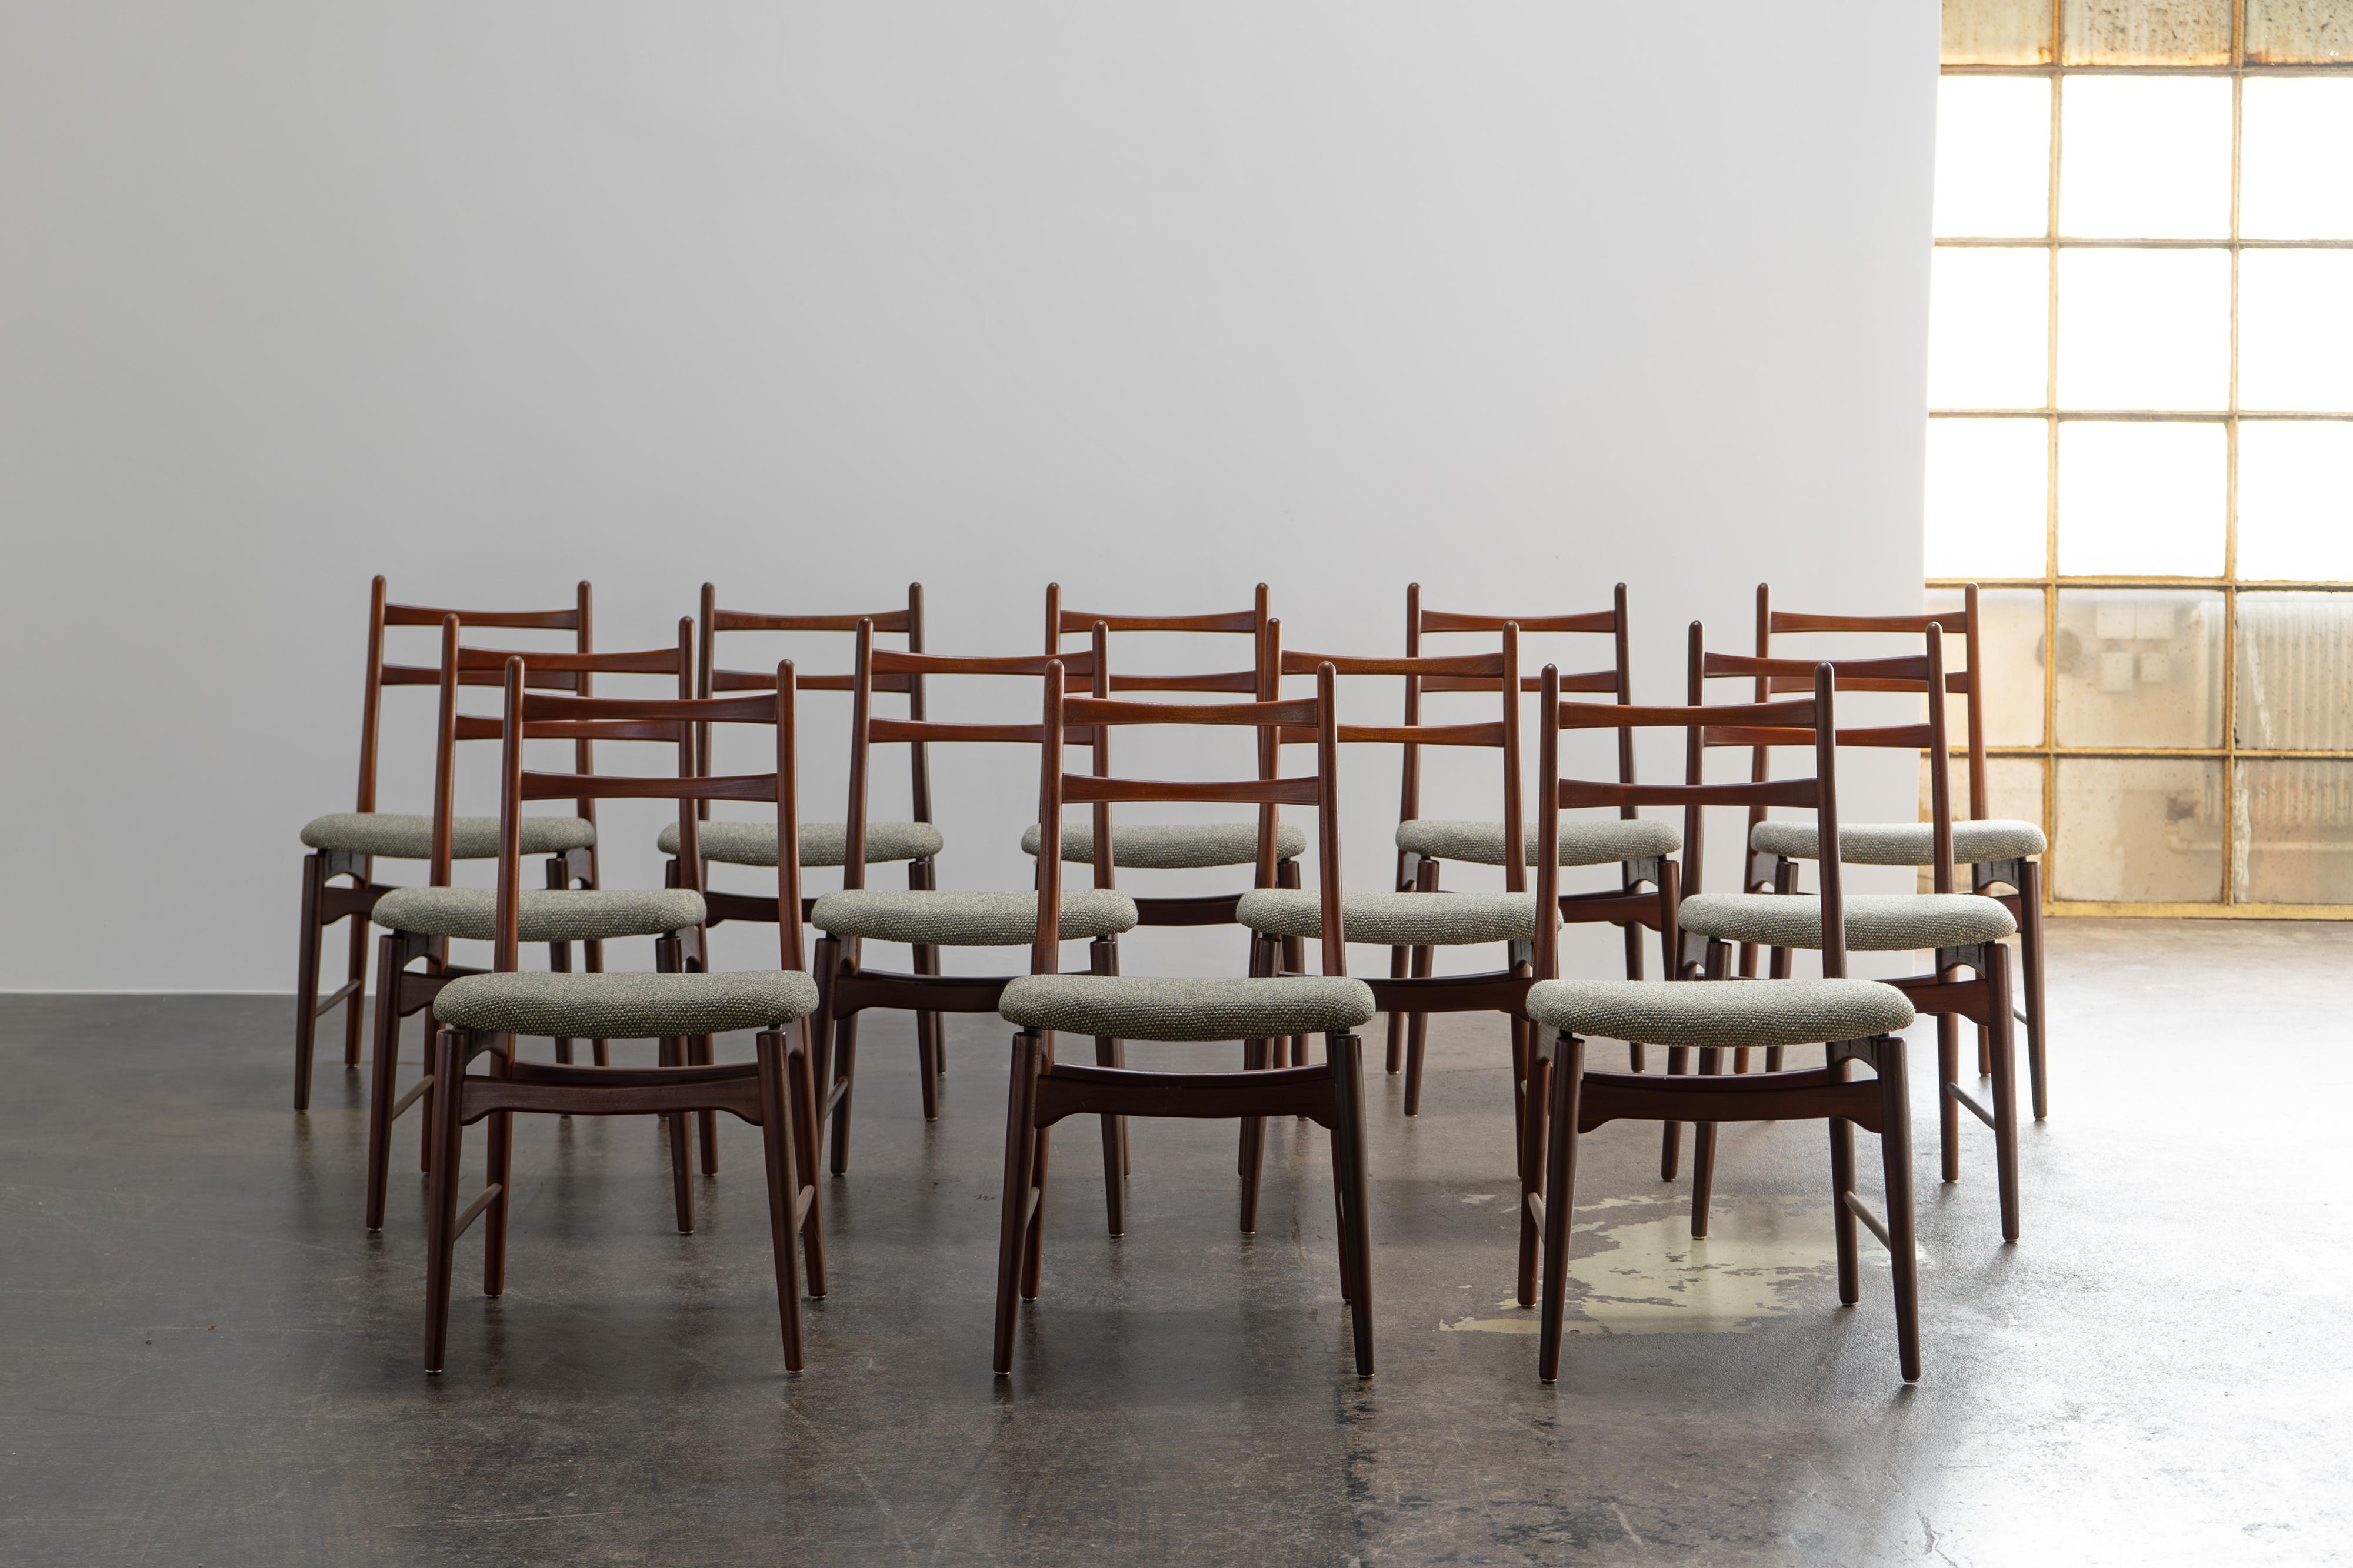 Set of Twelve Dining Chairs by Wilkhahn
Germany, 1958

Set consisting of twelve delicate mid-century chairs from Wilkhahn. The chairs were made in Germany in the 1950s/60s and are reupholstered with a coarse fabric from Sahco.

Designer: Georg